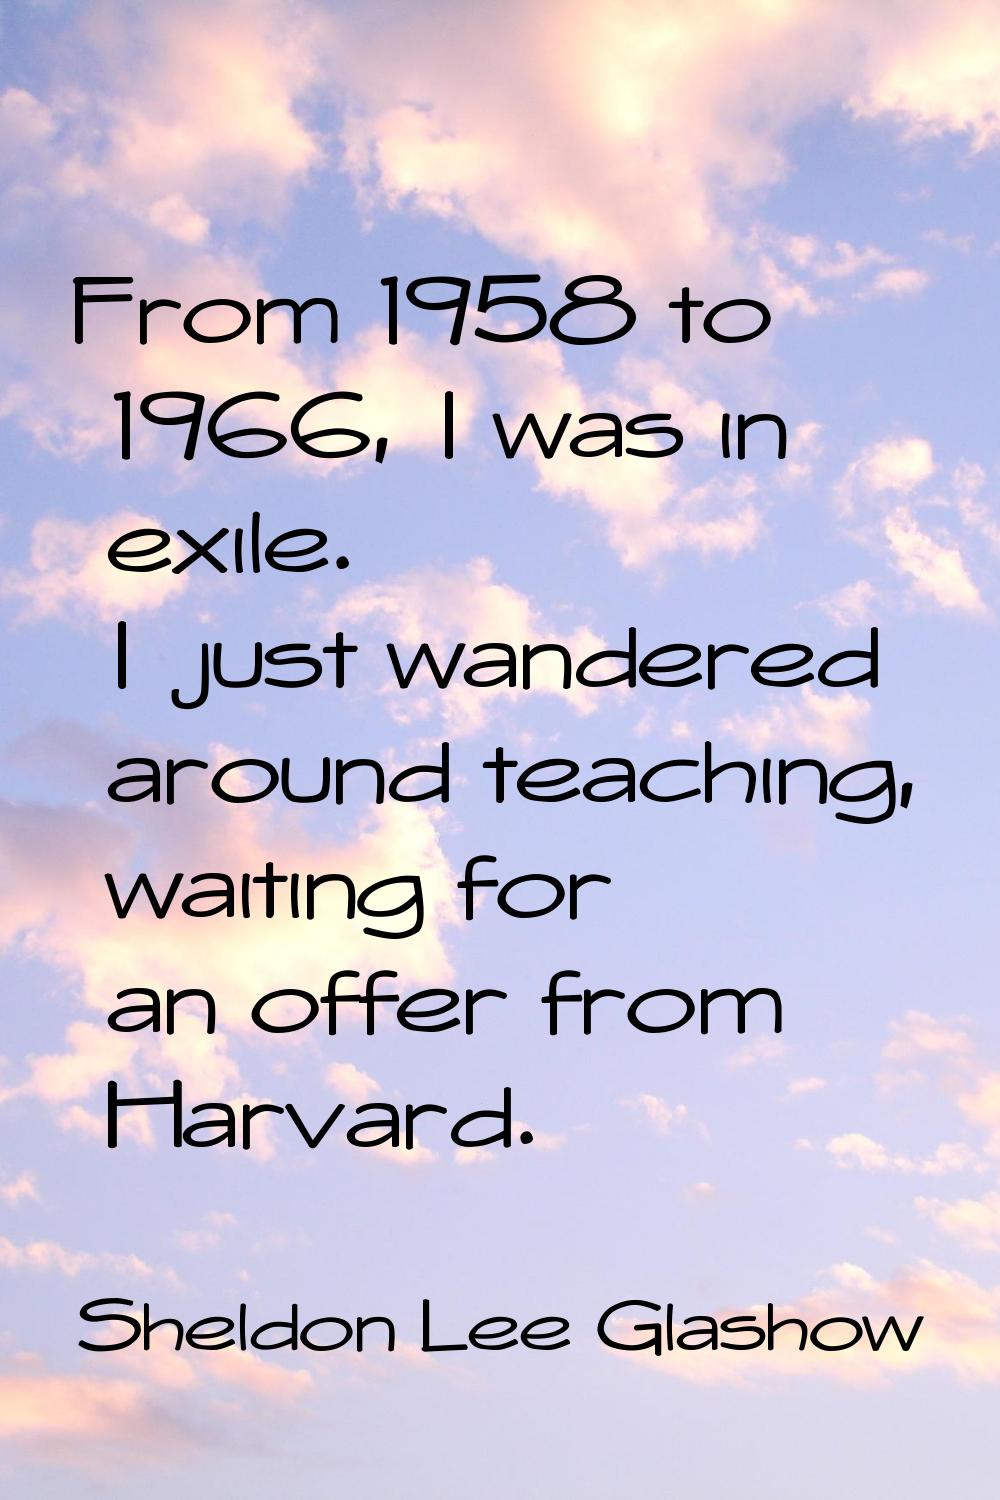 From 1958 to 1966, I was in exile. I just wandered around teaching, waiting for an offer from Harva